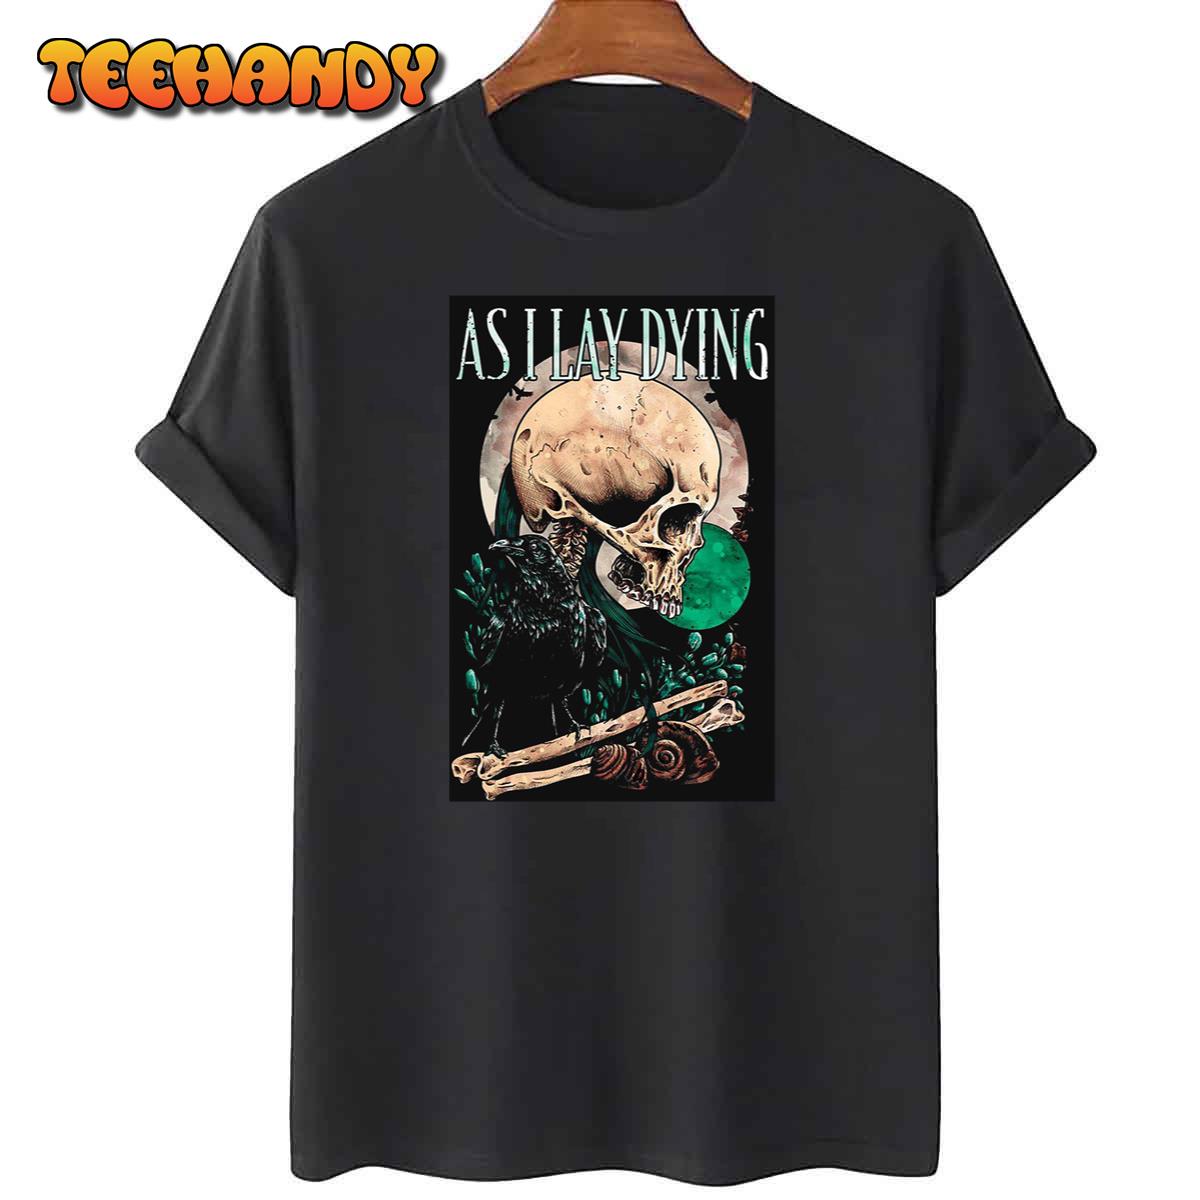 As I Lay Dying Unisex T-Shirt